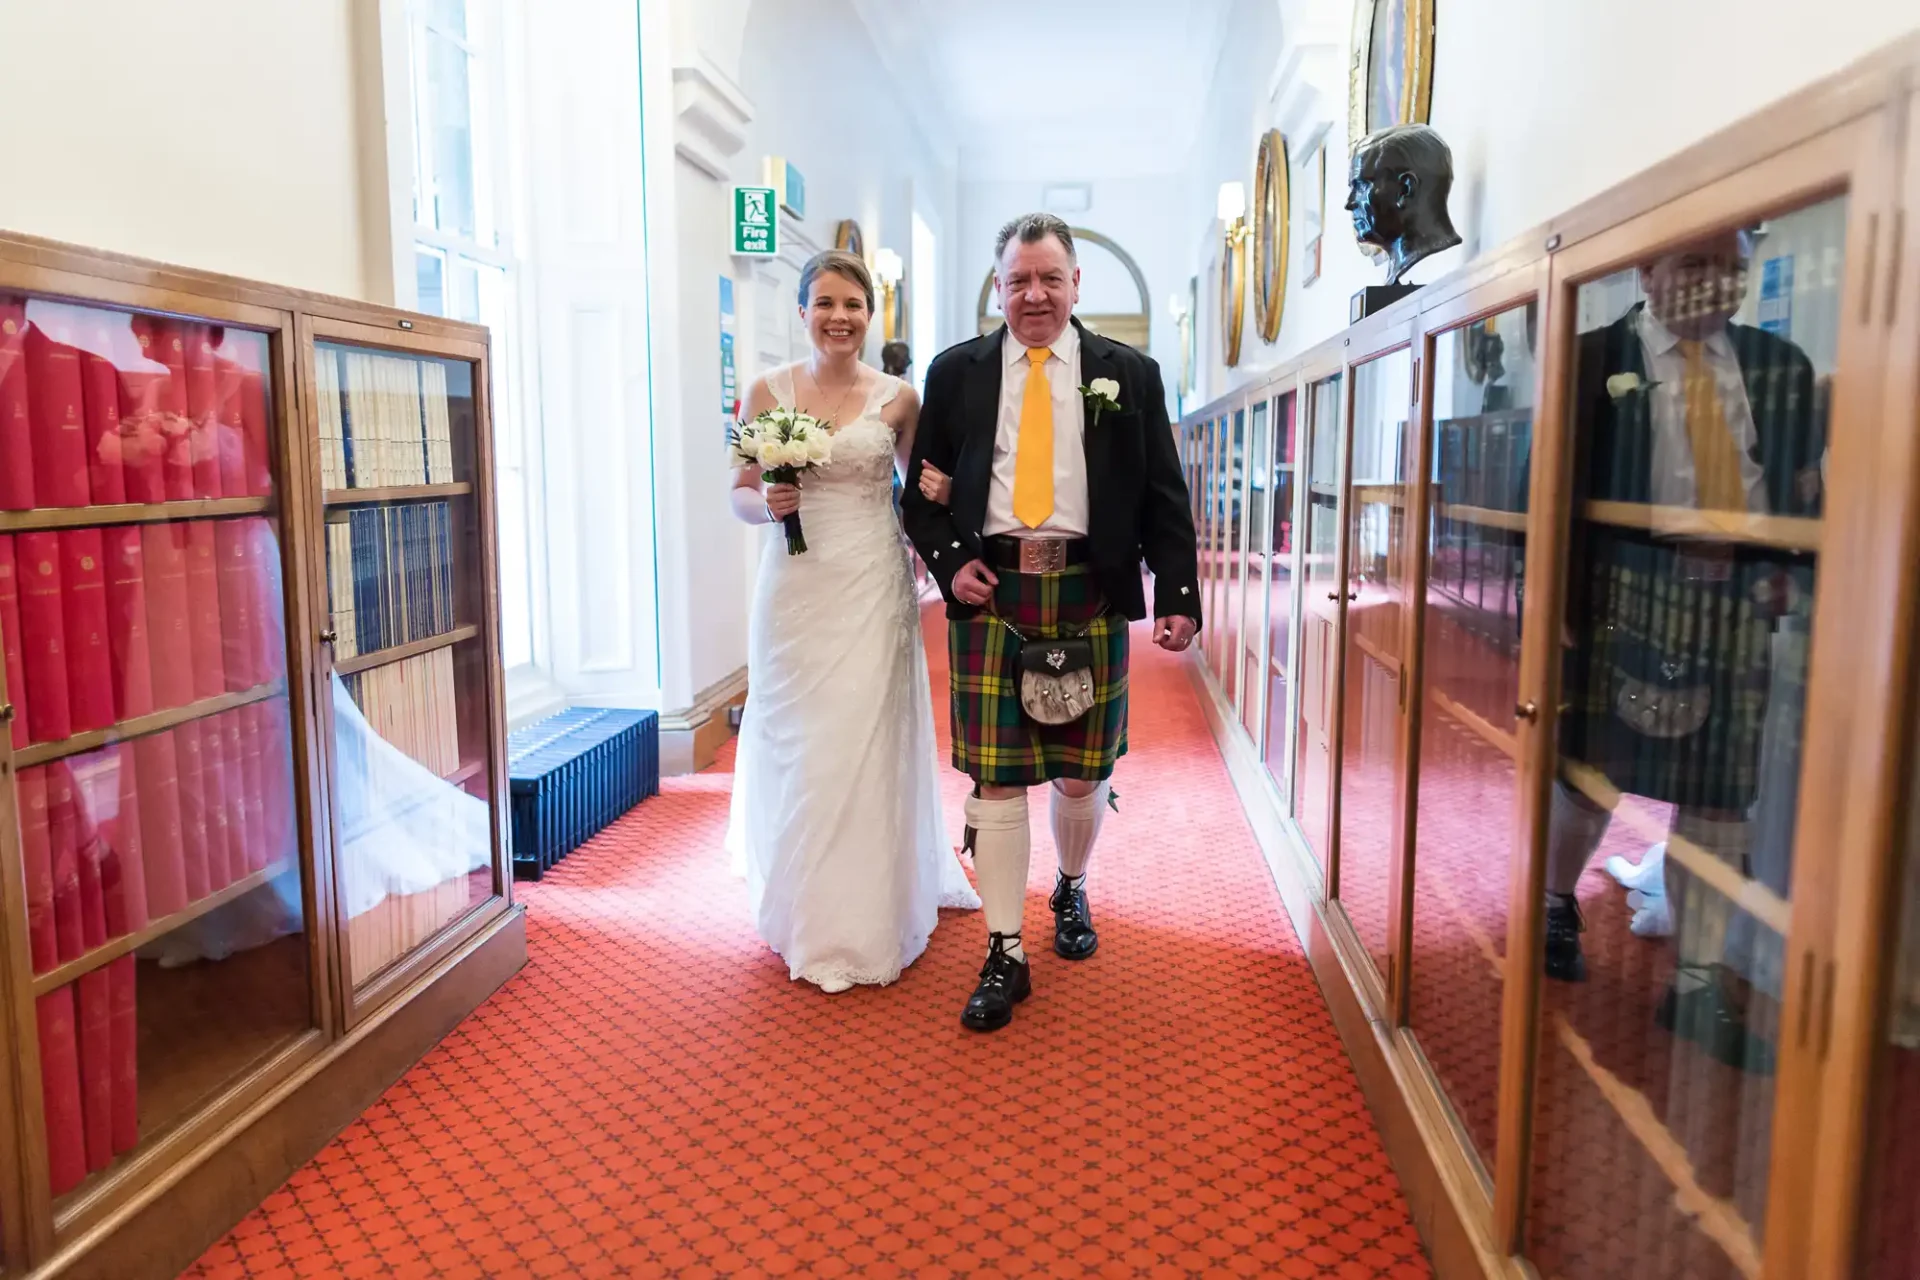 Bride in white dress and groom in scottish kilt walking down a hallway, smiling and holding hands, with display cases on either side.